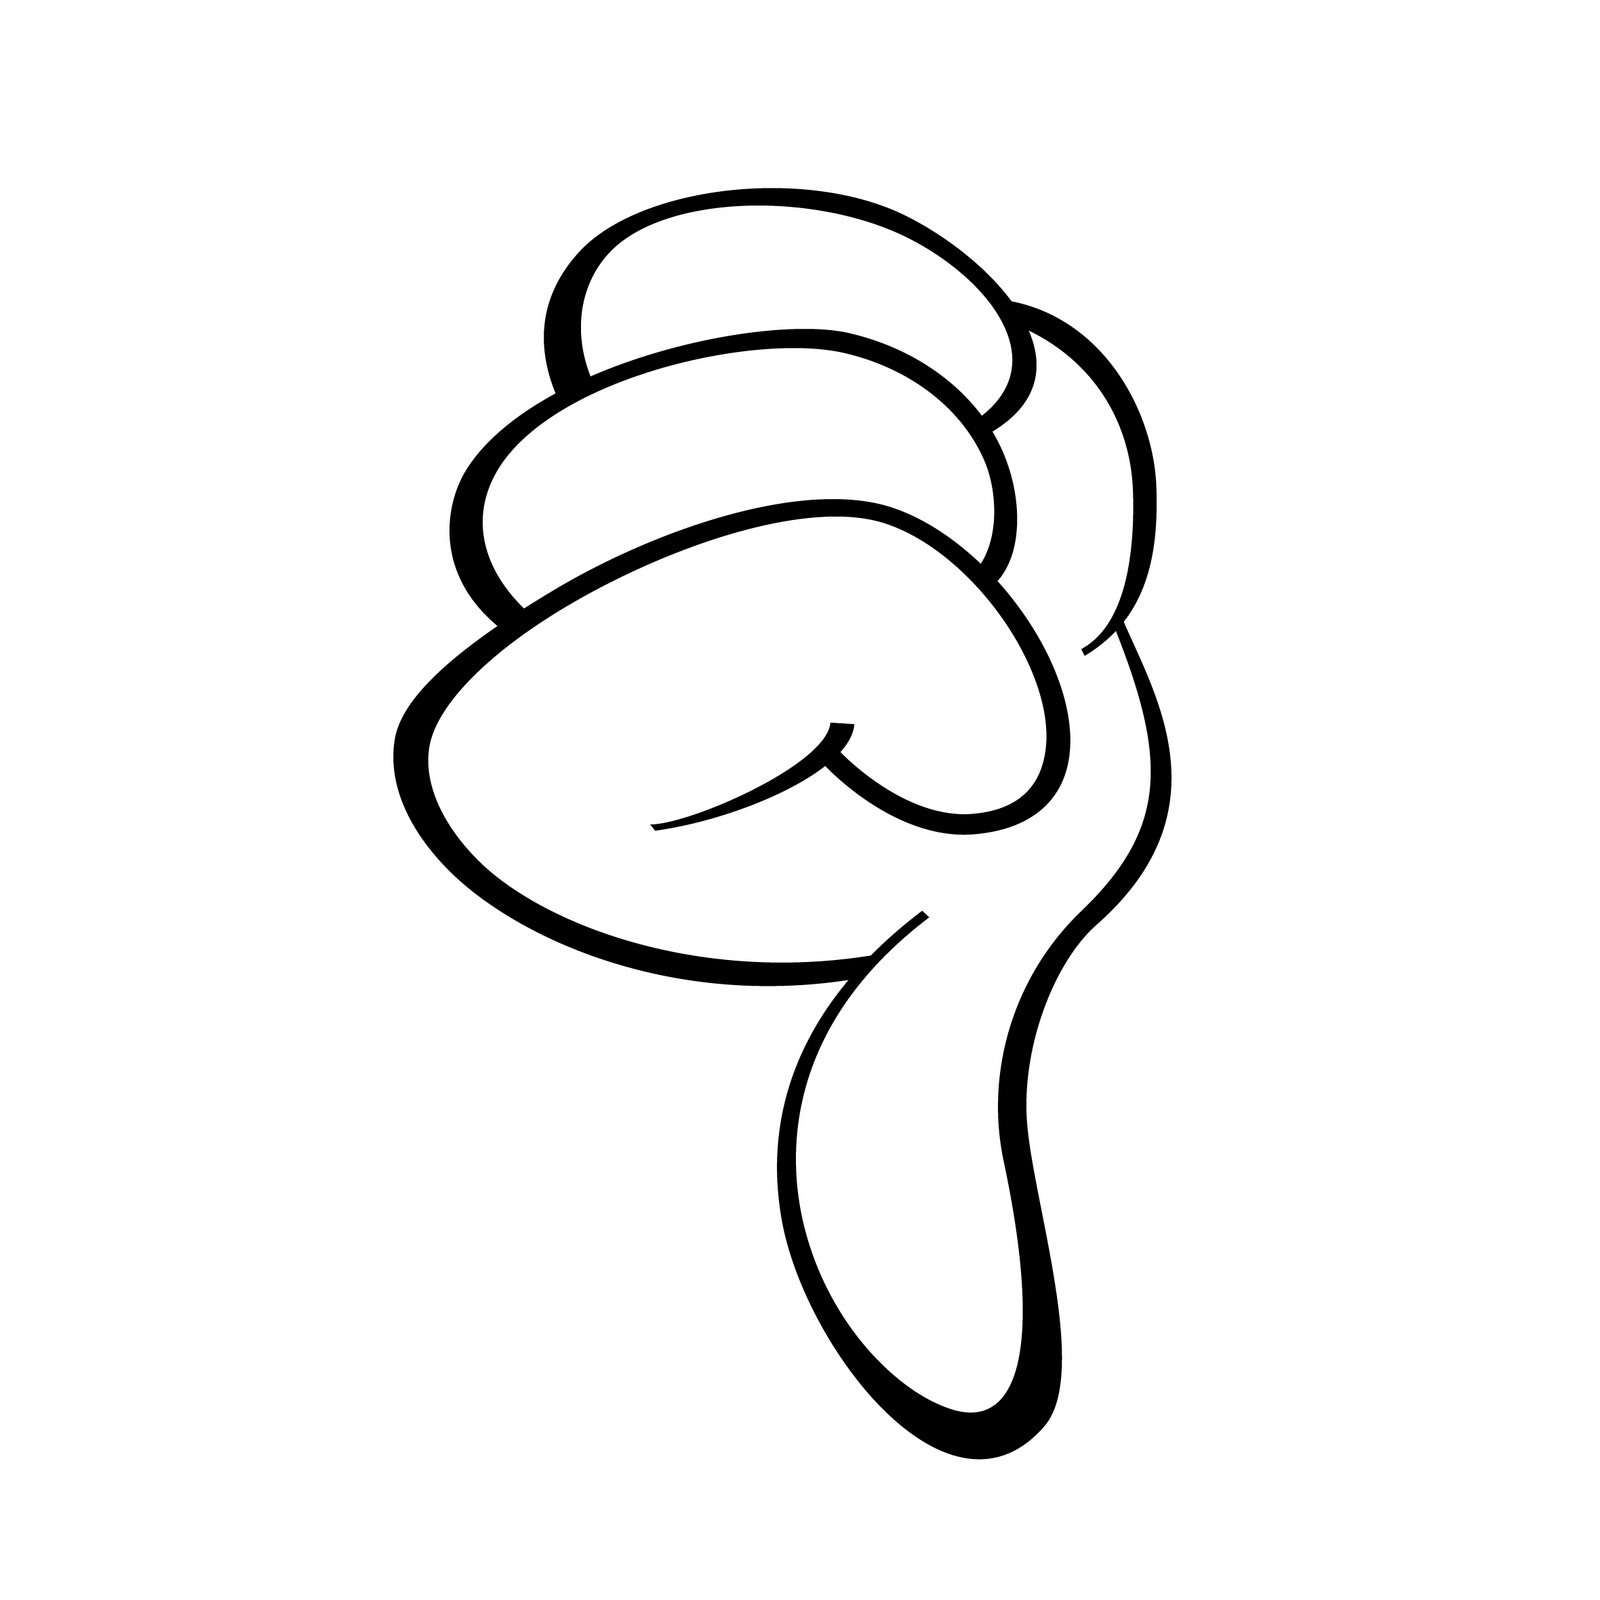 Thumbs Down Image - ClipArt Best